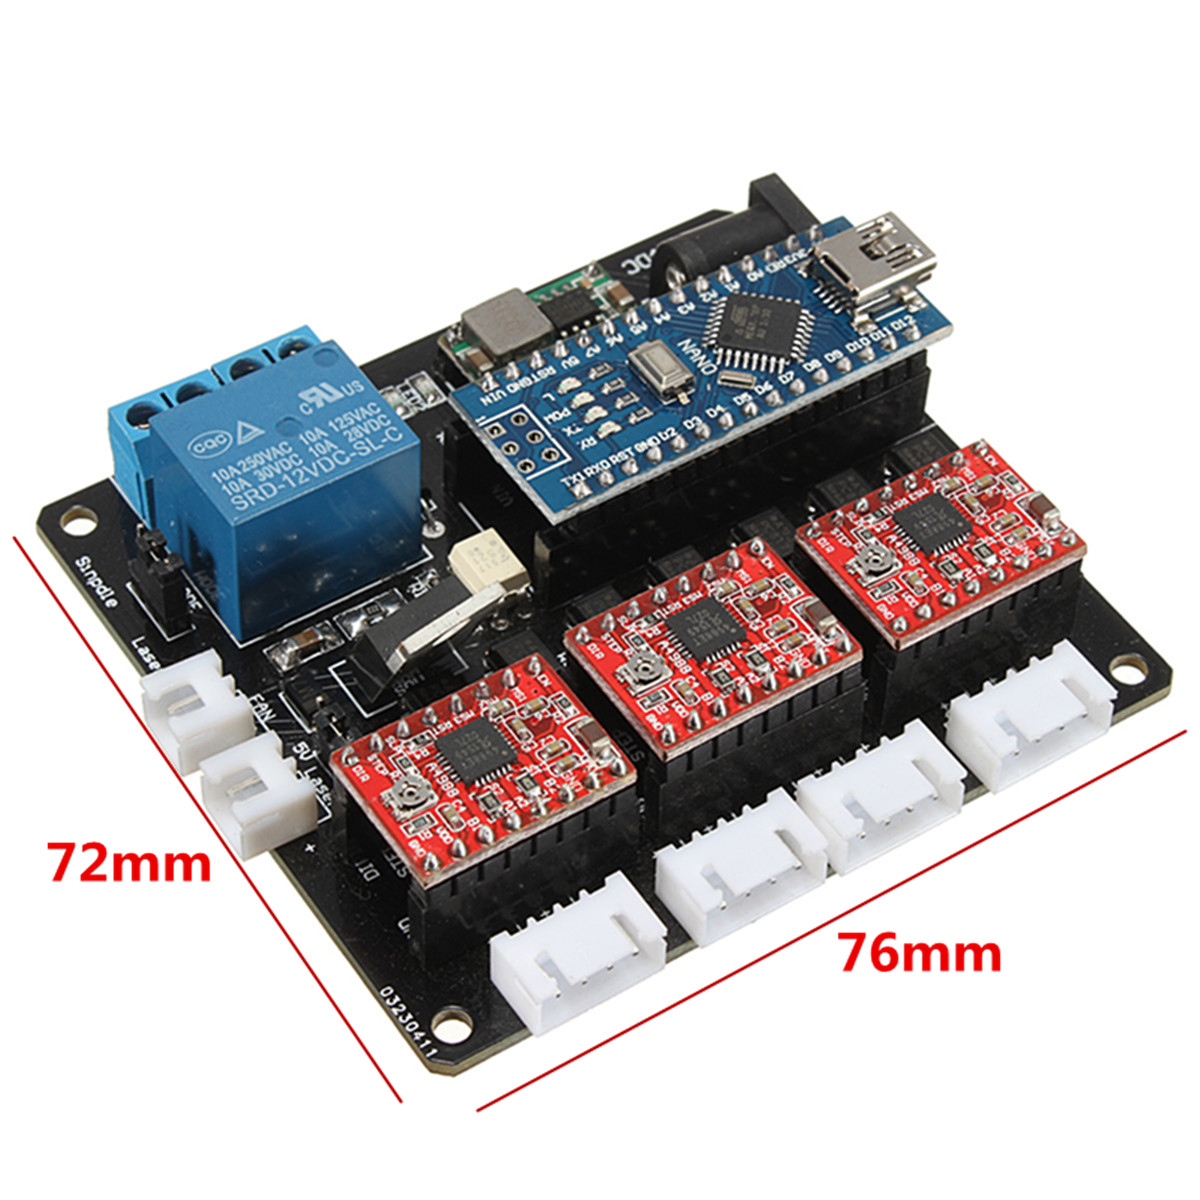 USB 3 Axis Stepper Motor Driver Board For DIY Laser Engraving Machine 3 Axis Control Board 13